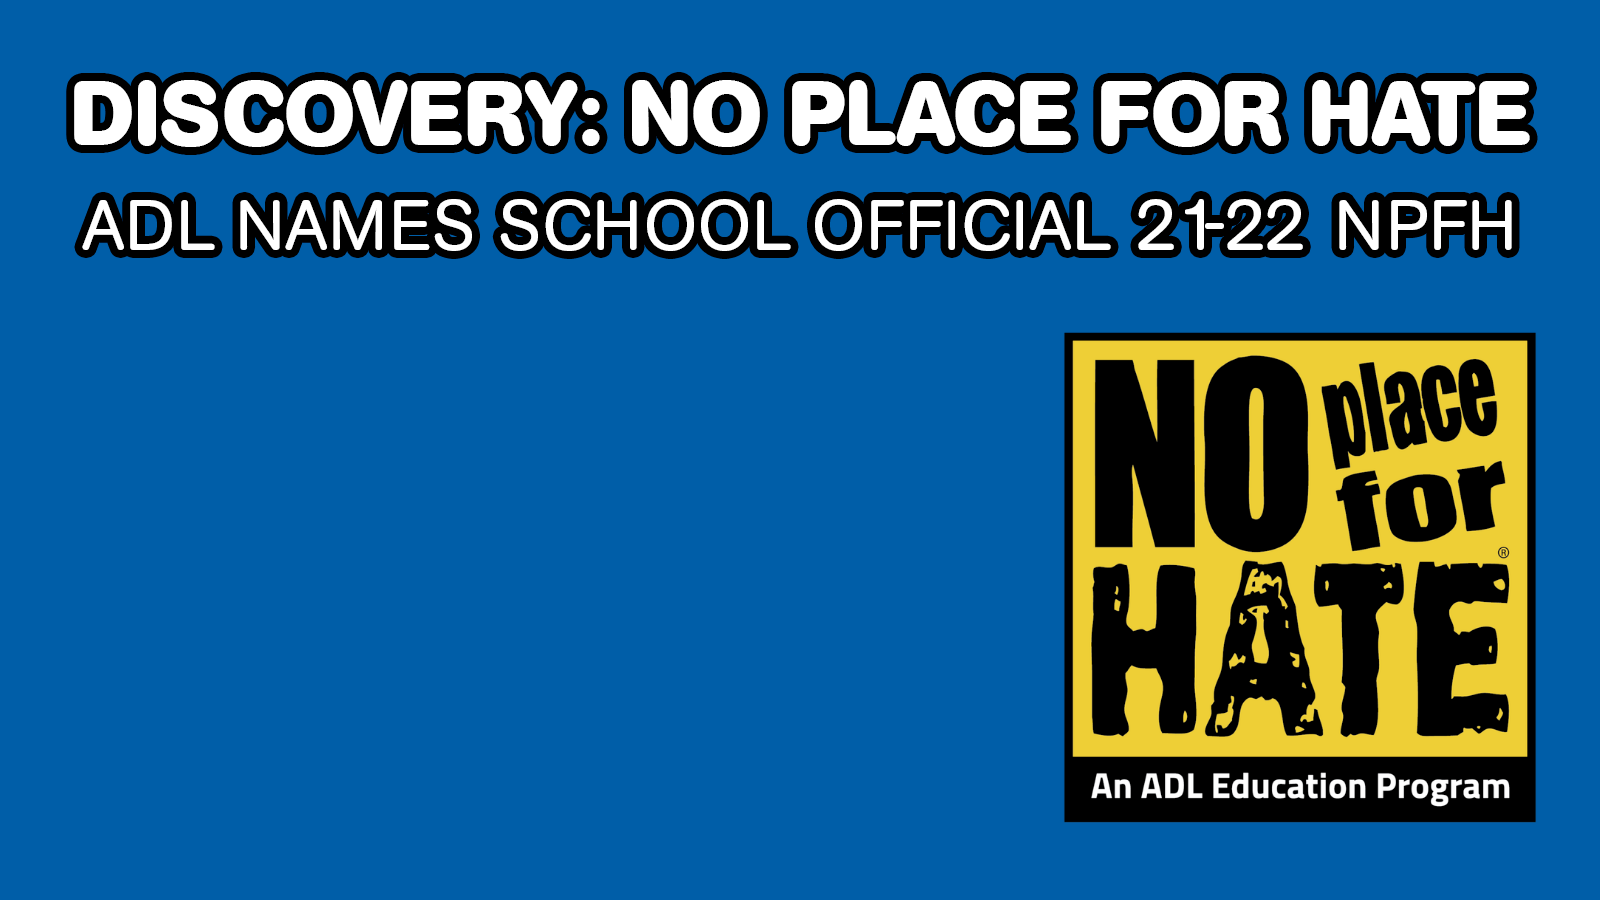 Discovery: No Place for Hate. ADL names school NPFH for 21-22.